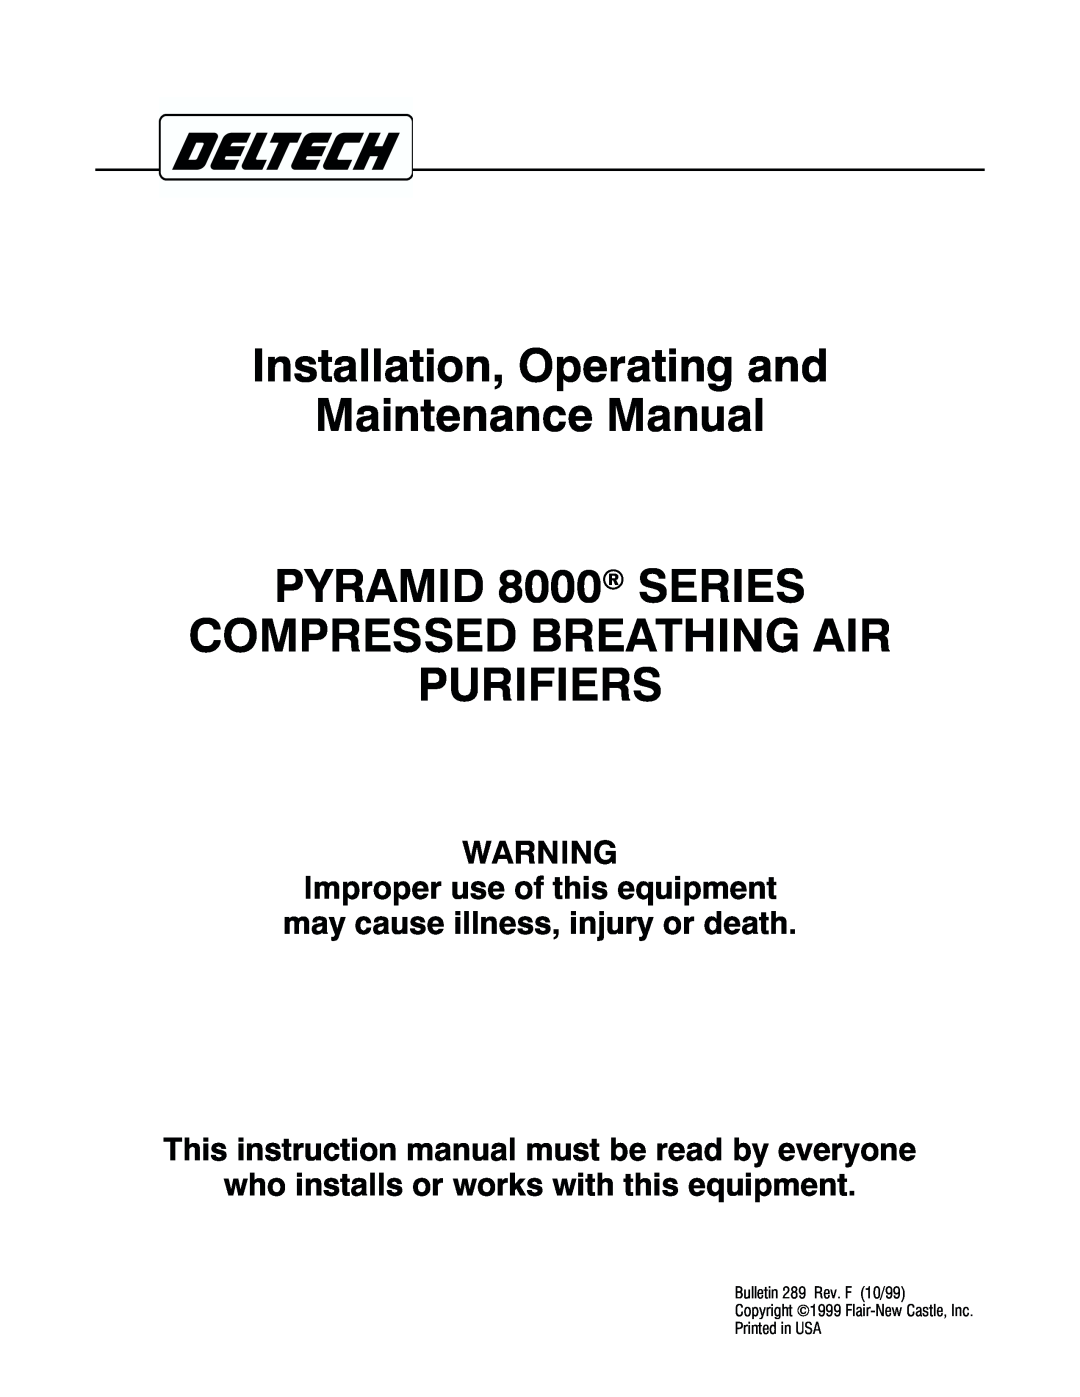 Deltech Fitness 8000 instruction manual Installation, Operating and Maintenance Manual, Purifiers 